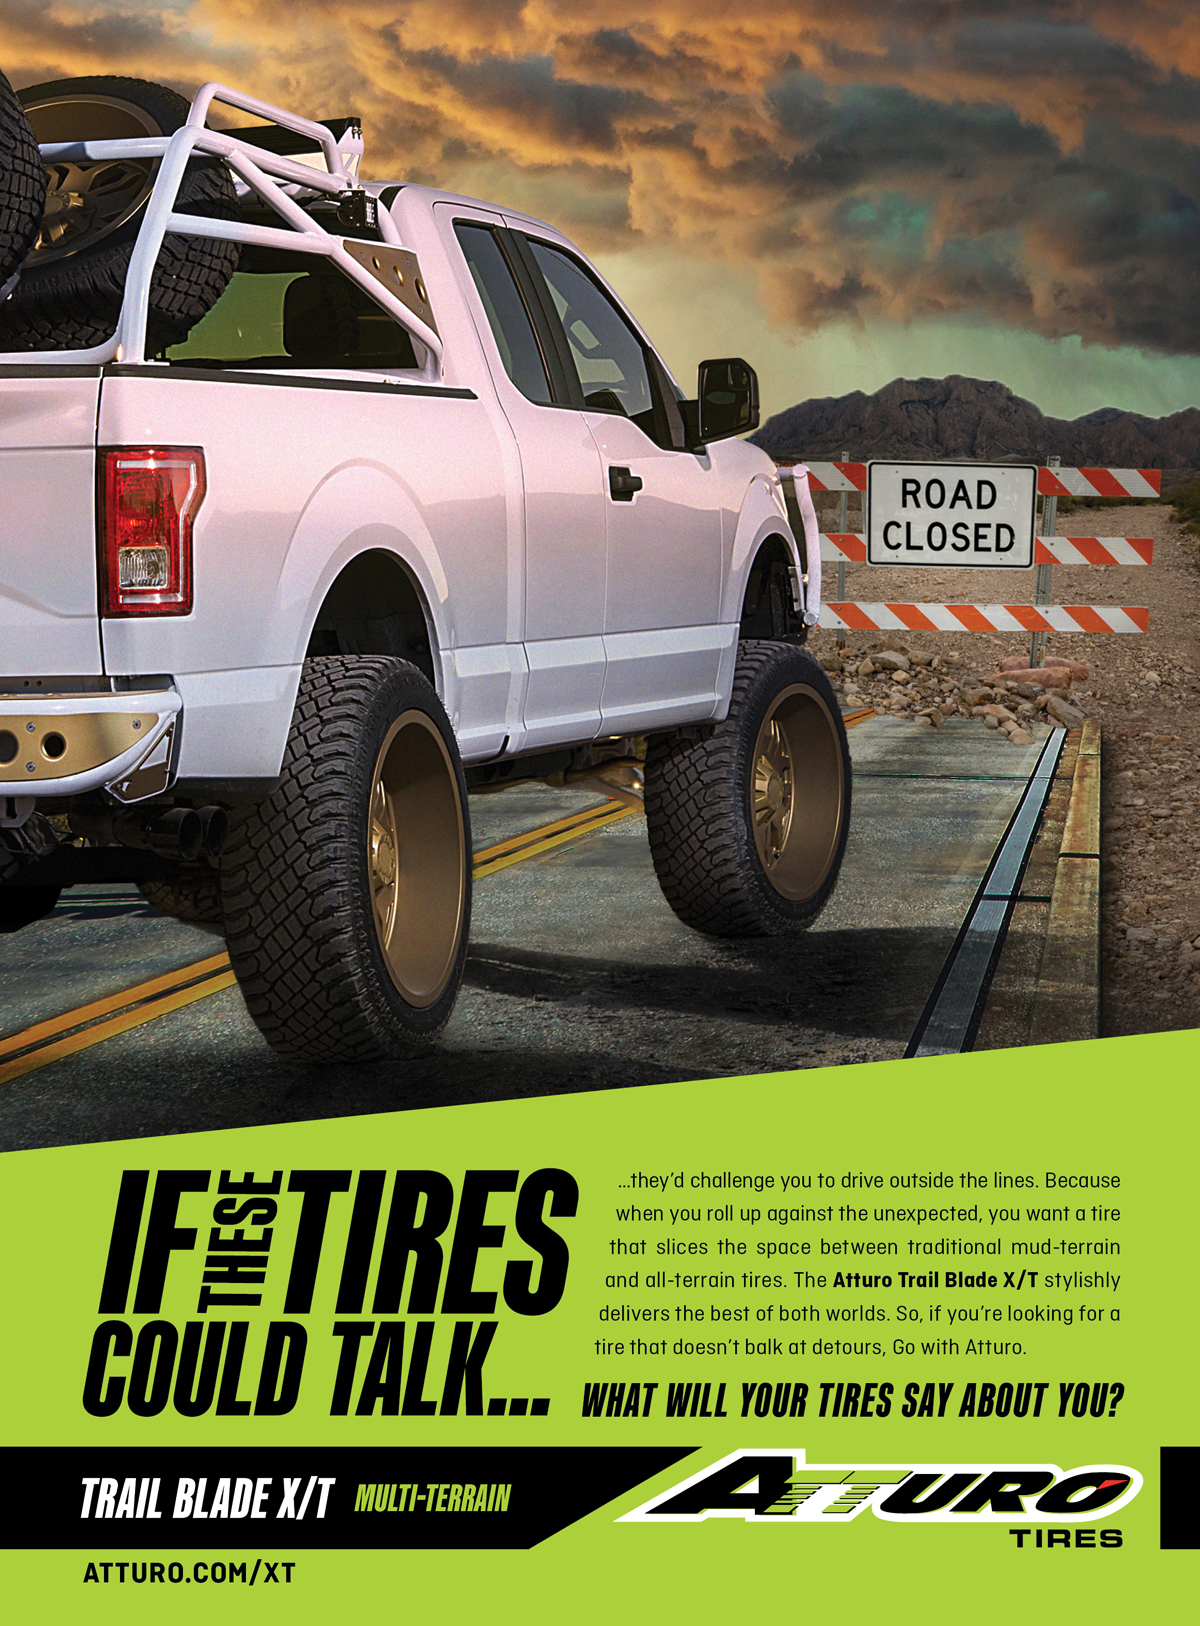 Atturo Tires - Print Ad - If These Tires Could Talk - Trail Blade X/T